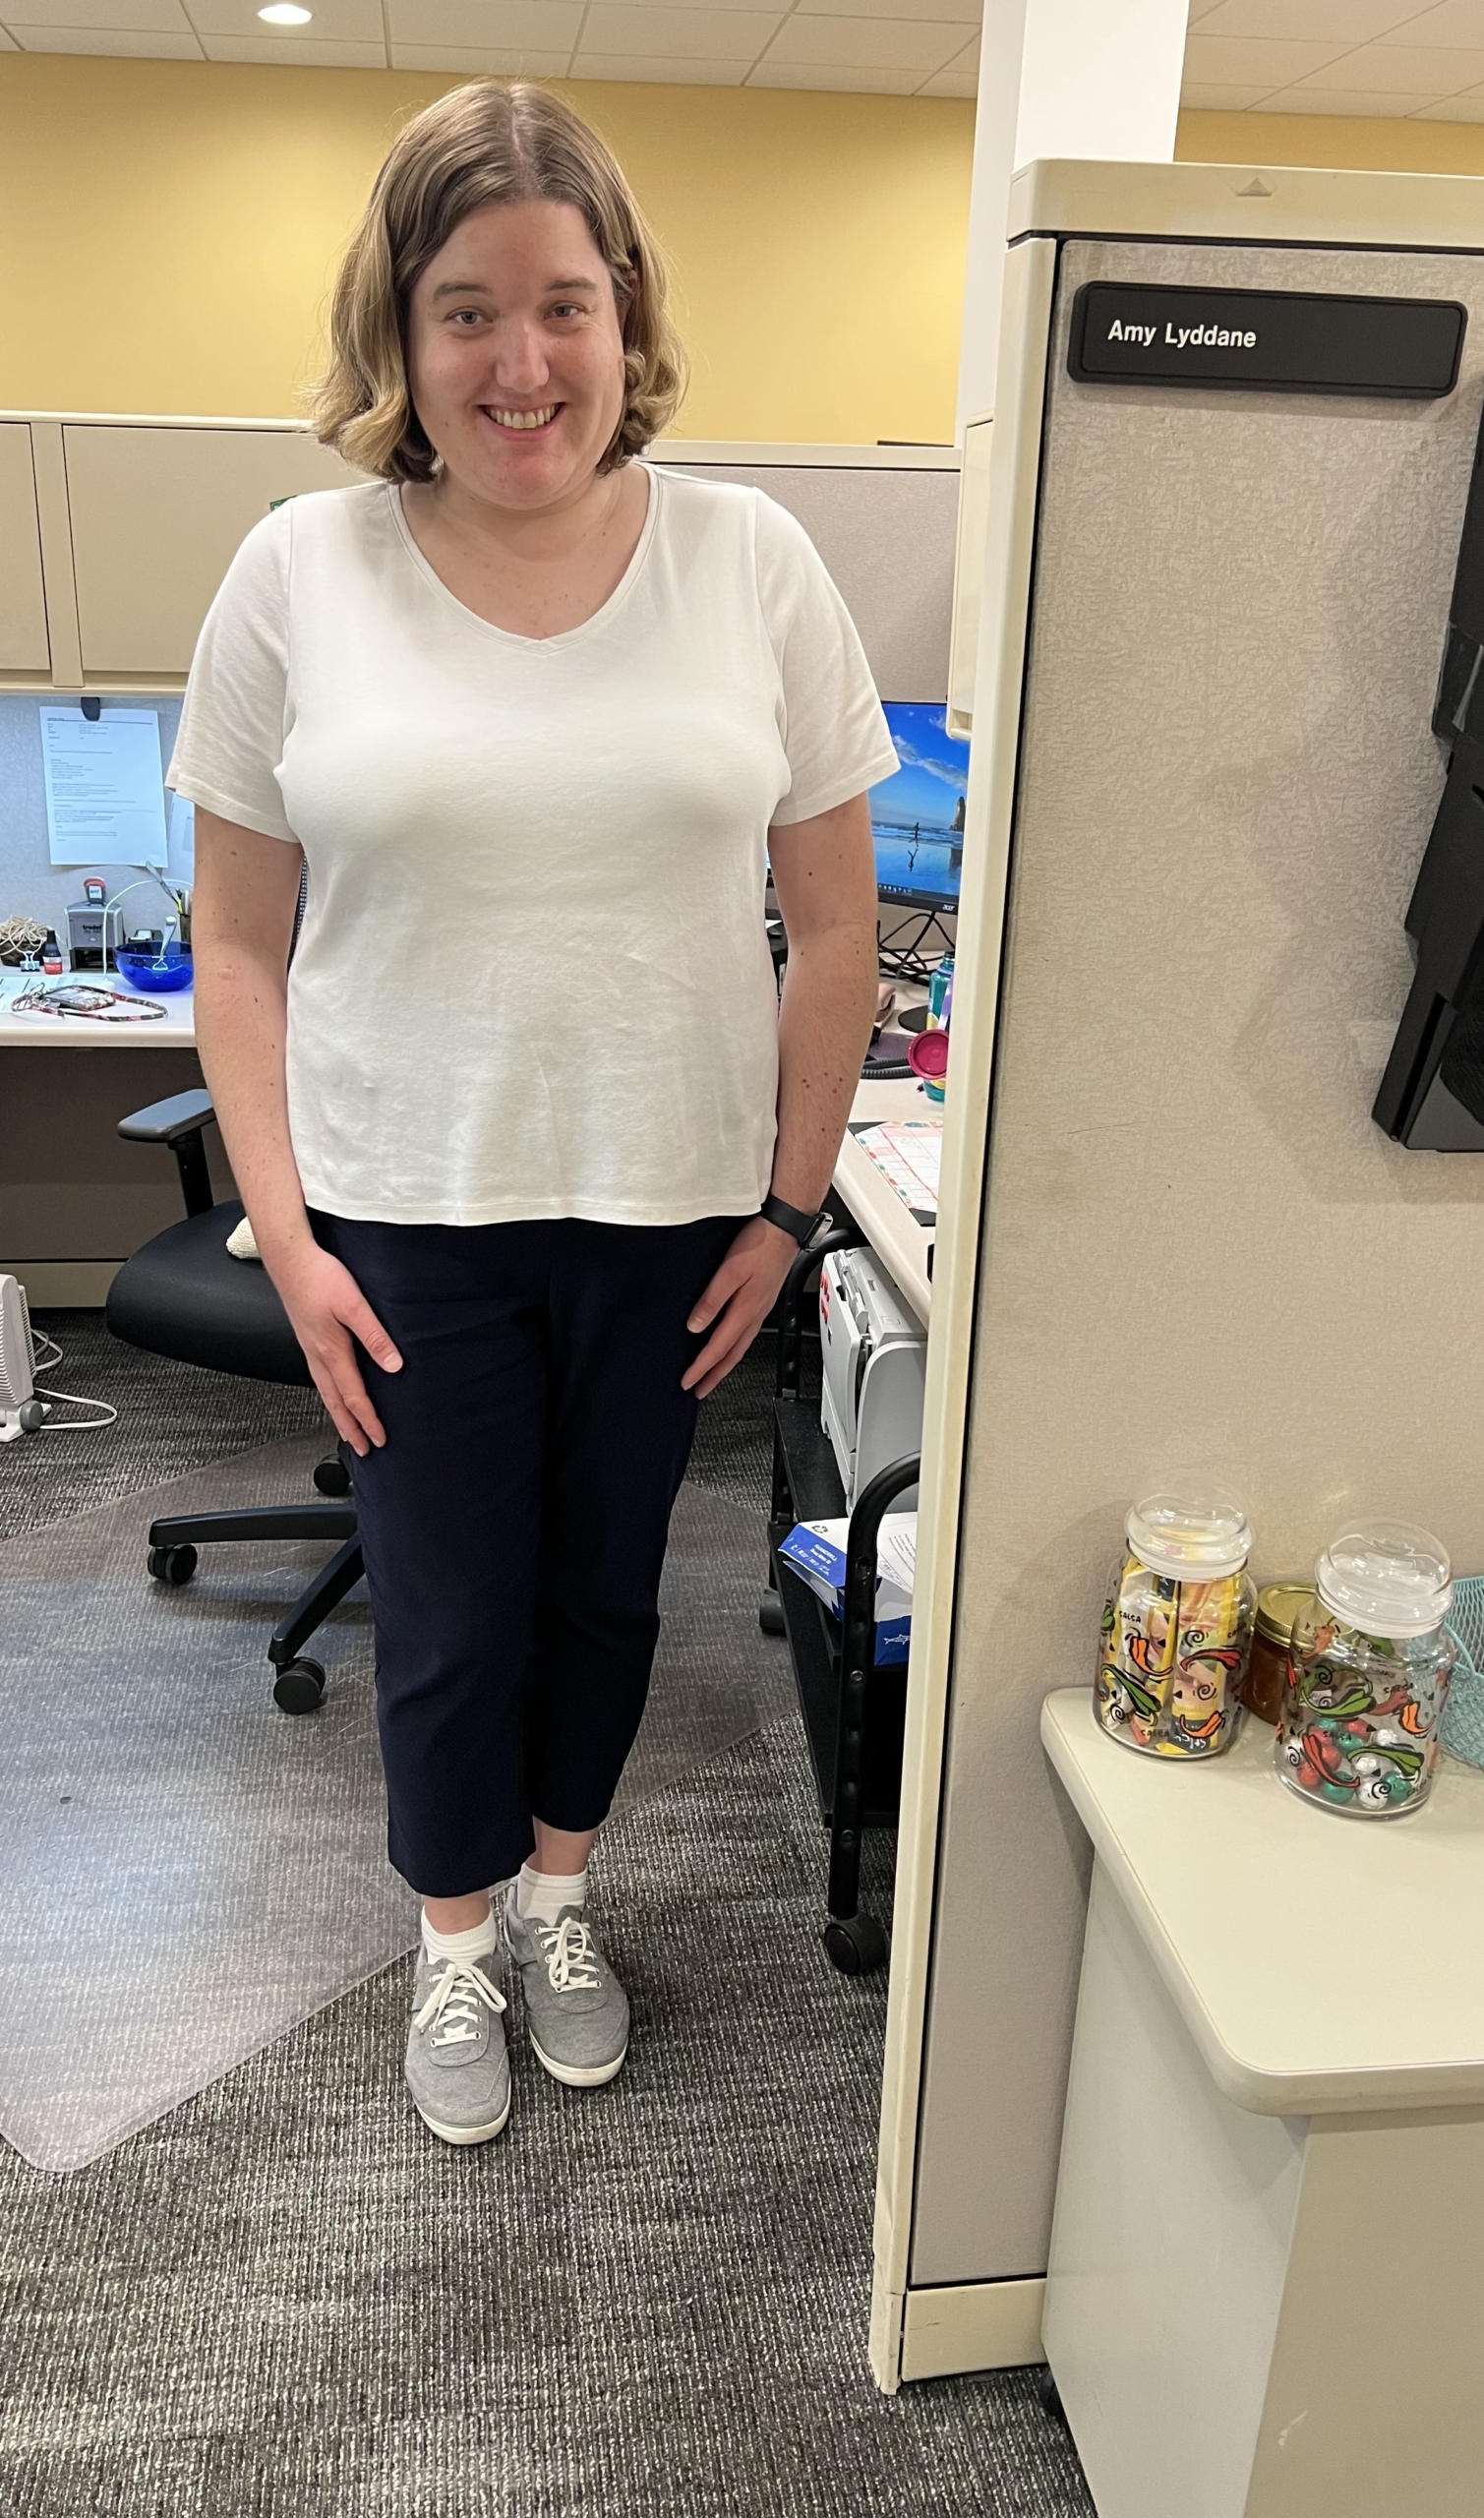 A white woman with blonde hair stands smiling with her arms at her sides in front of an office desk cubicle. She is wearing a white t shirt, black pants, and white shoes. 